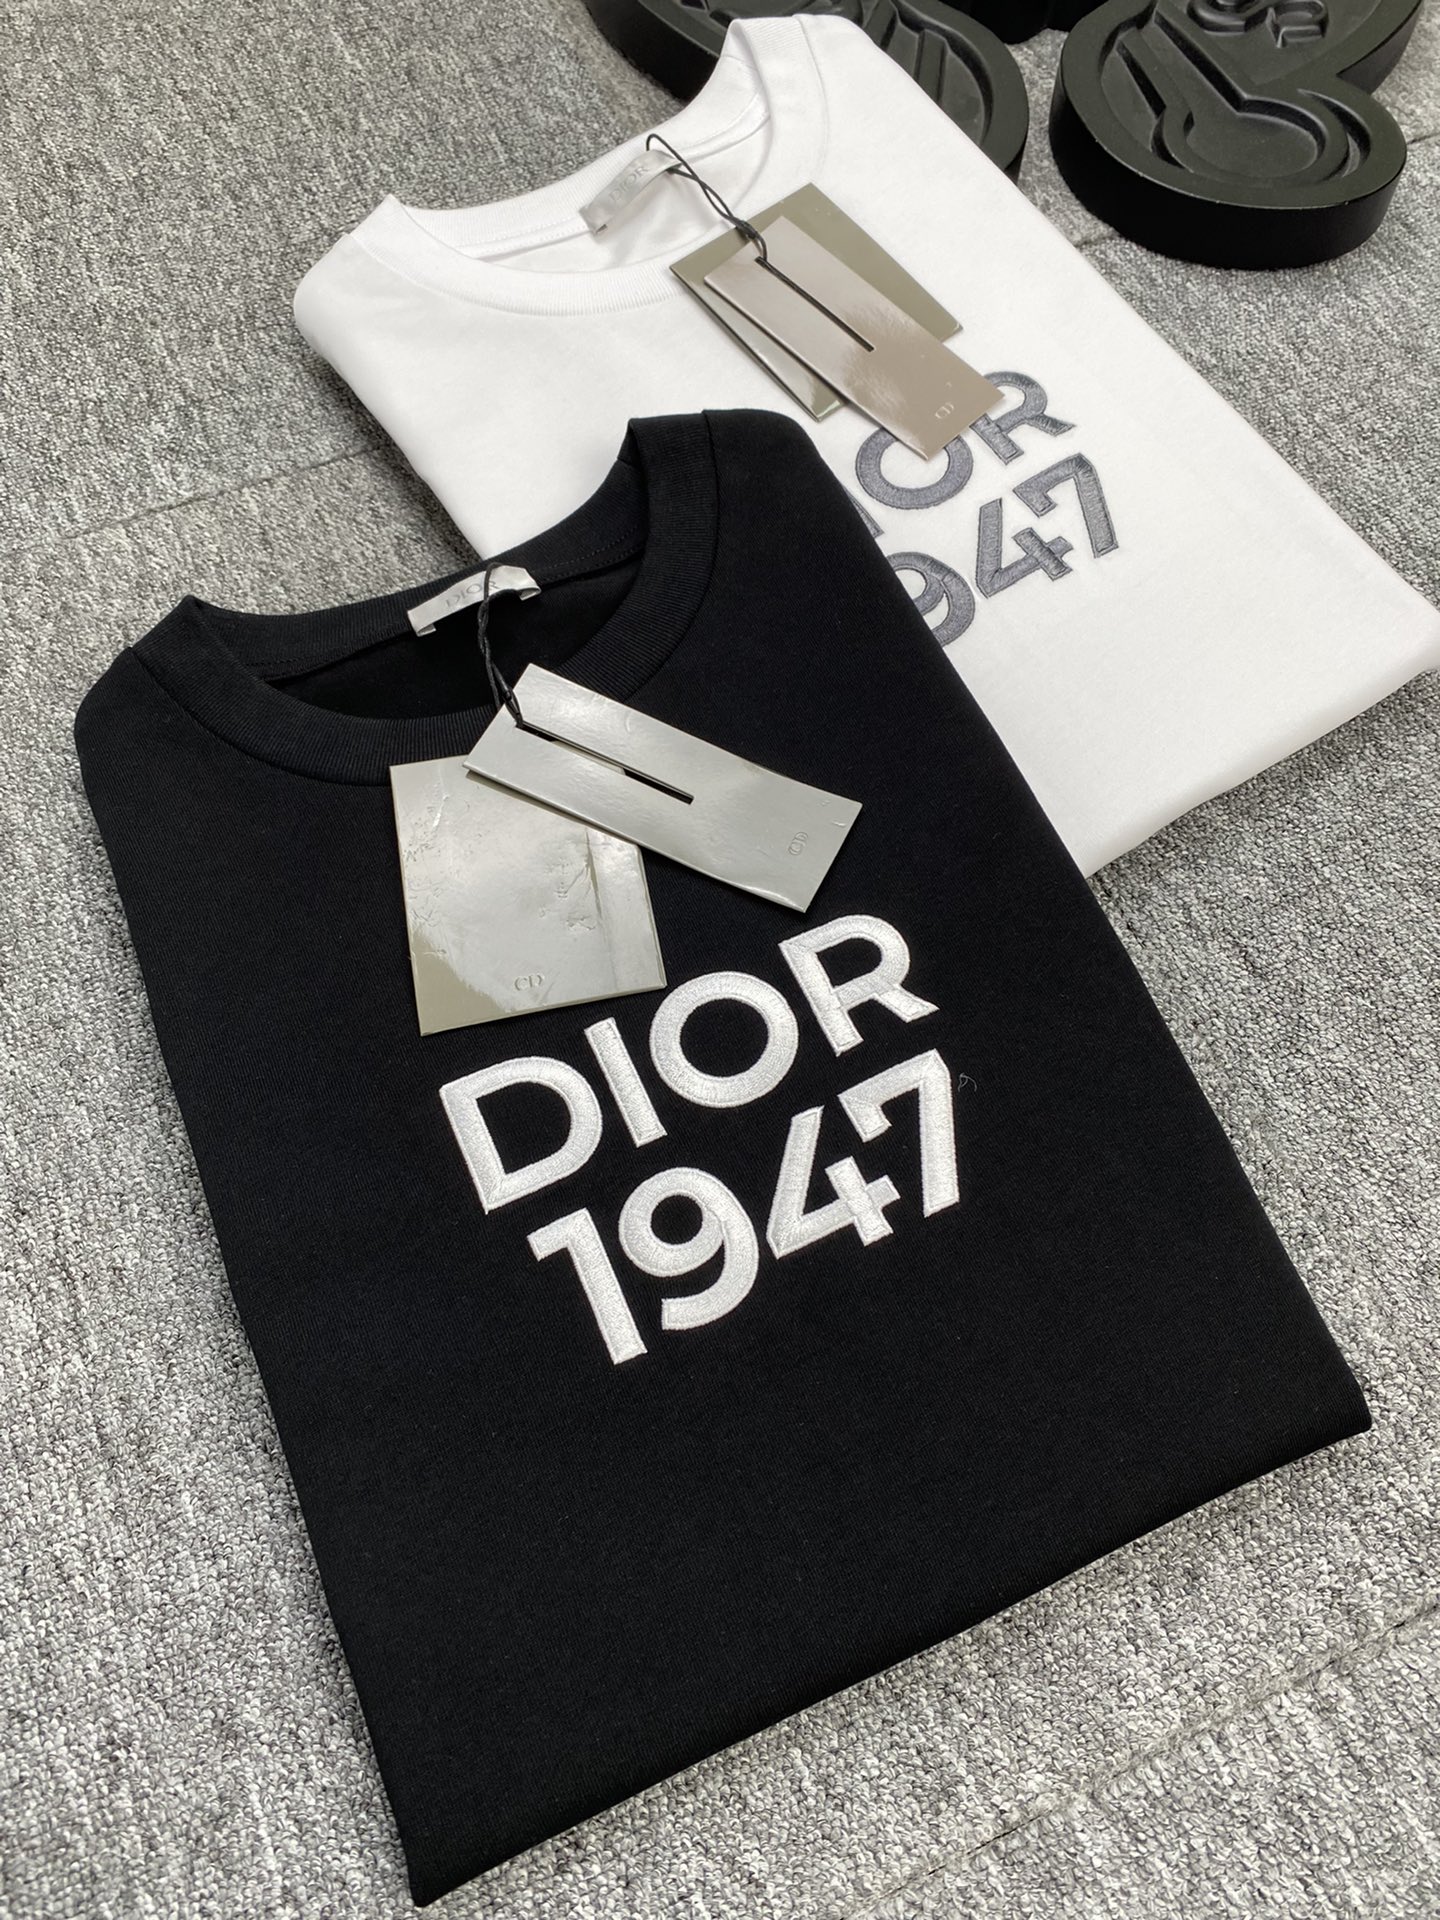 Dior Clothing T-Shirt 2023 Replica
 Embroidery Unisex Cotton Spring/Summer Collection Short Sleeve